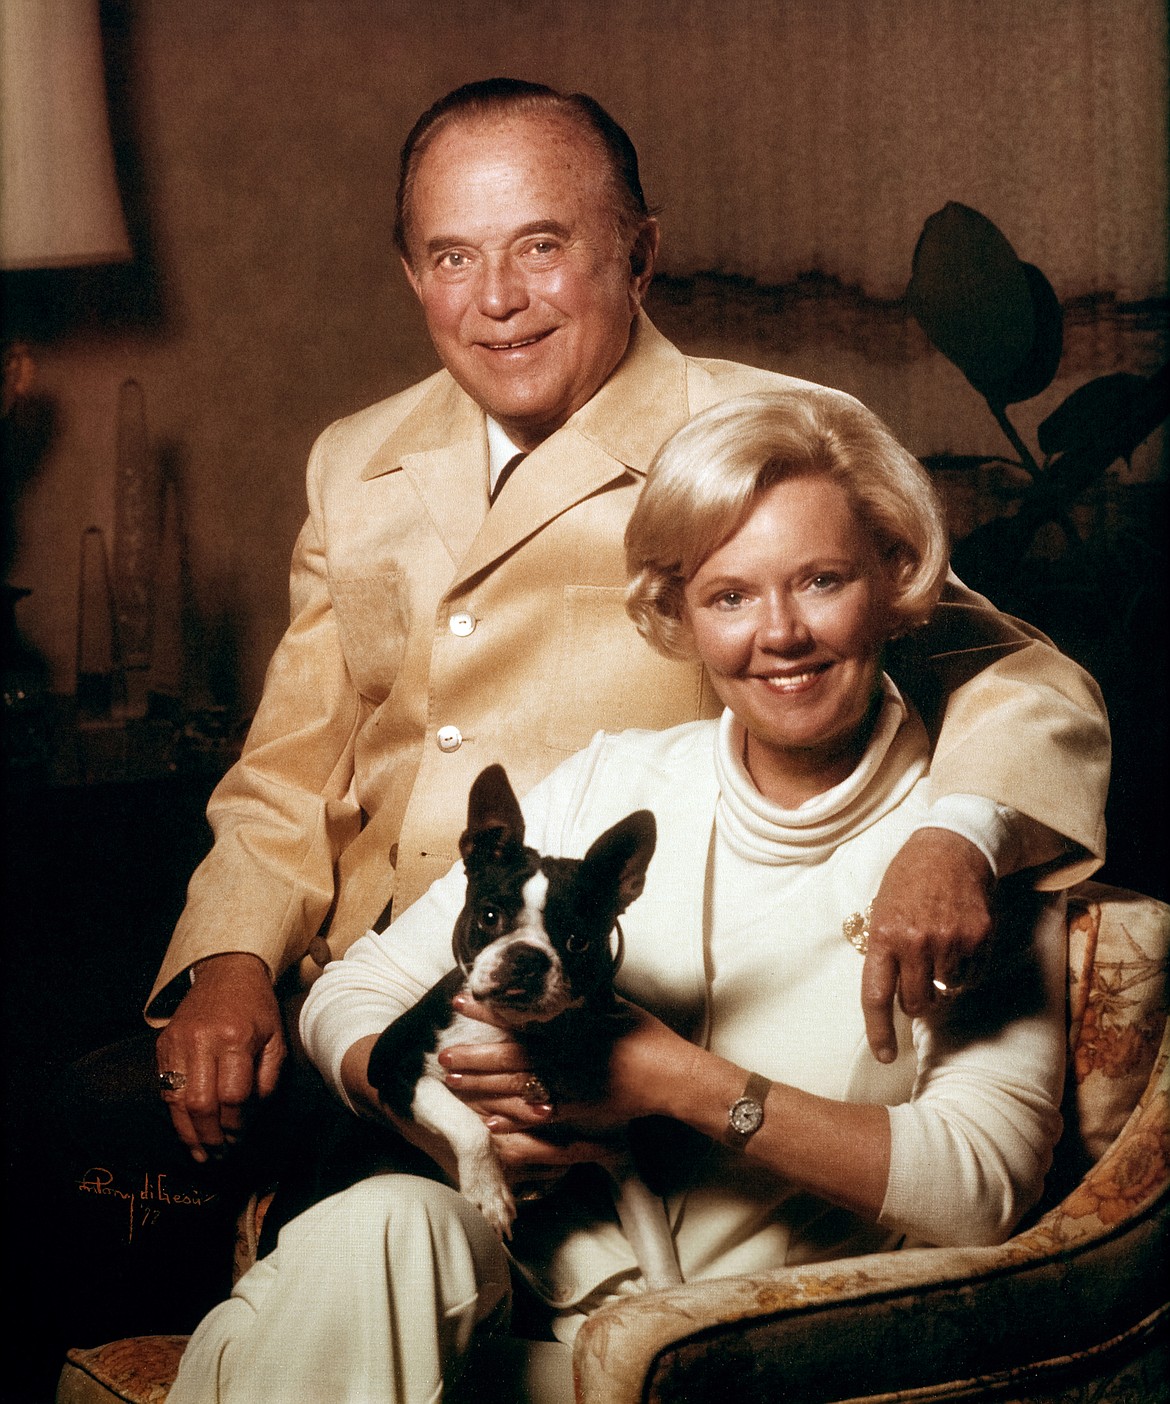 Courtesy photo
Joan Kroc played an important part in the building of McDonald&#146;s as the wife of an early franchisee and as Ray&#146;s confidante.